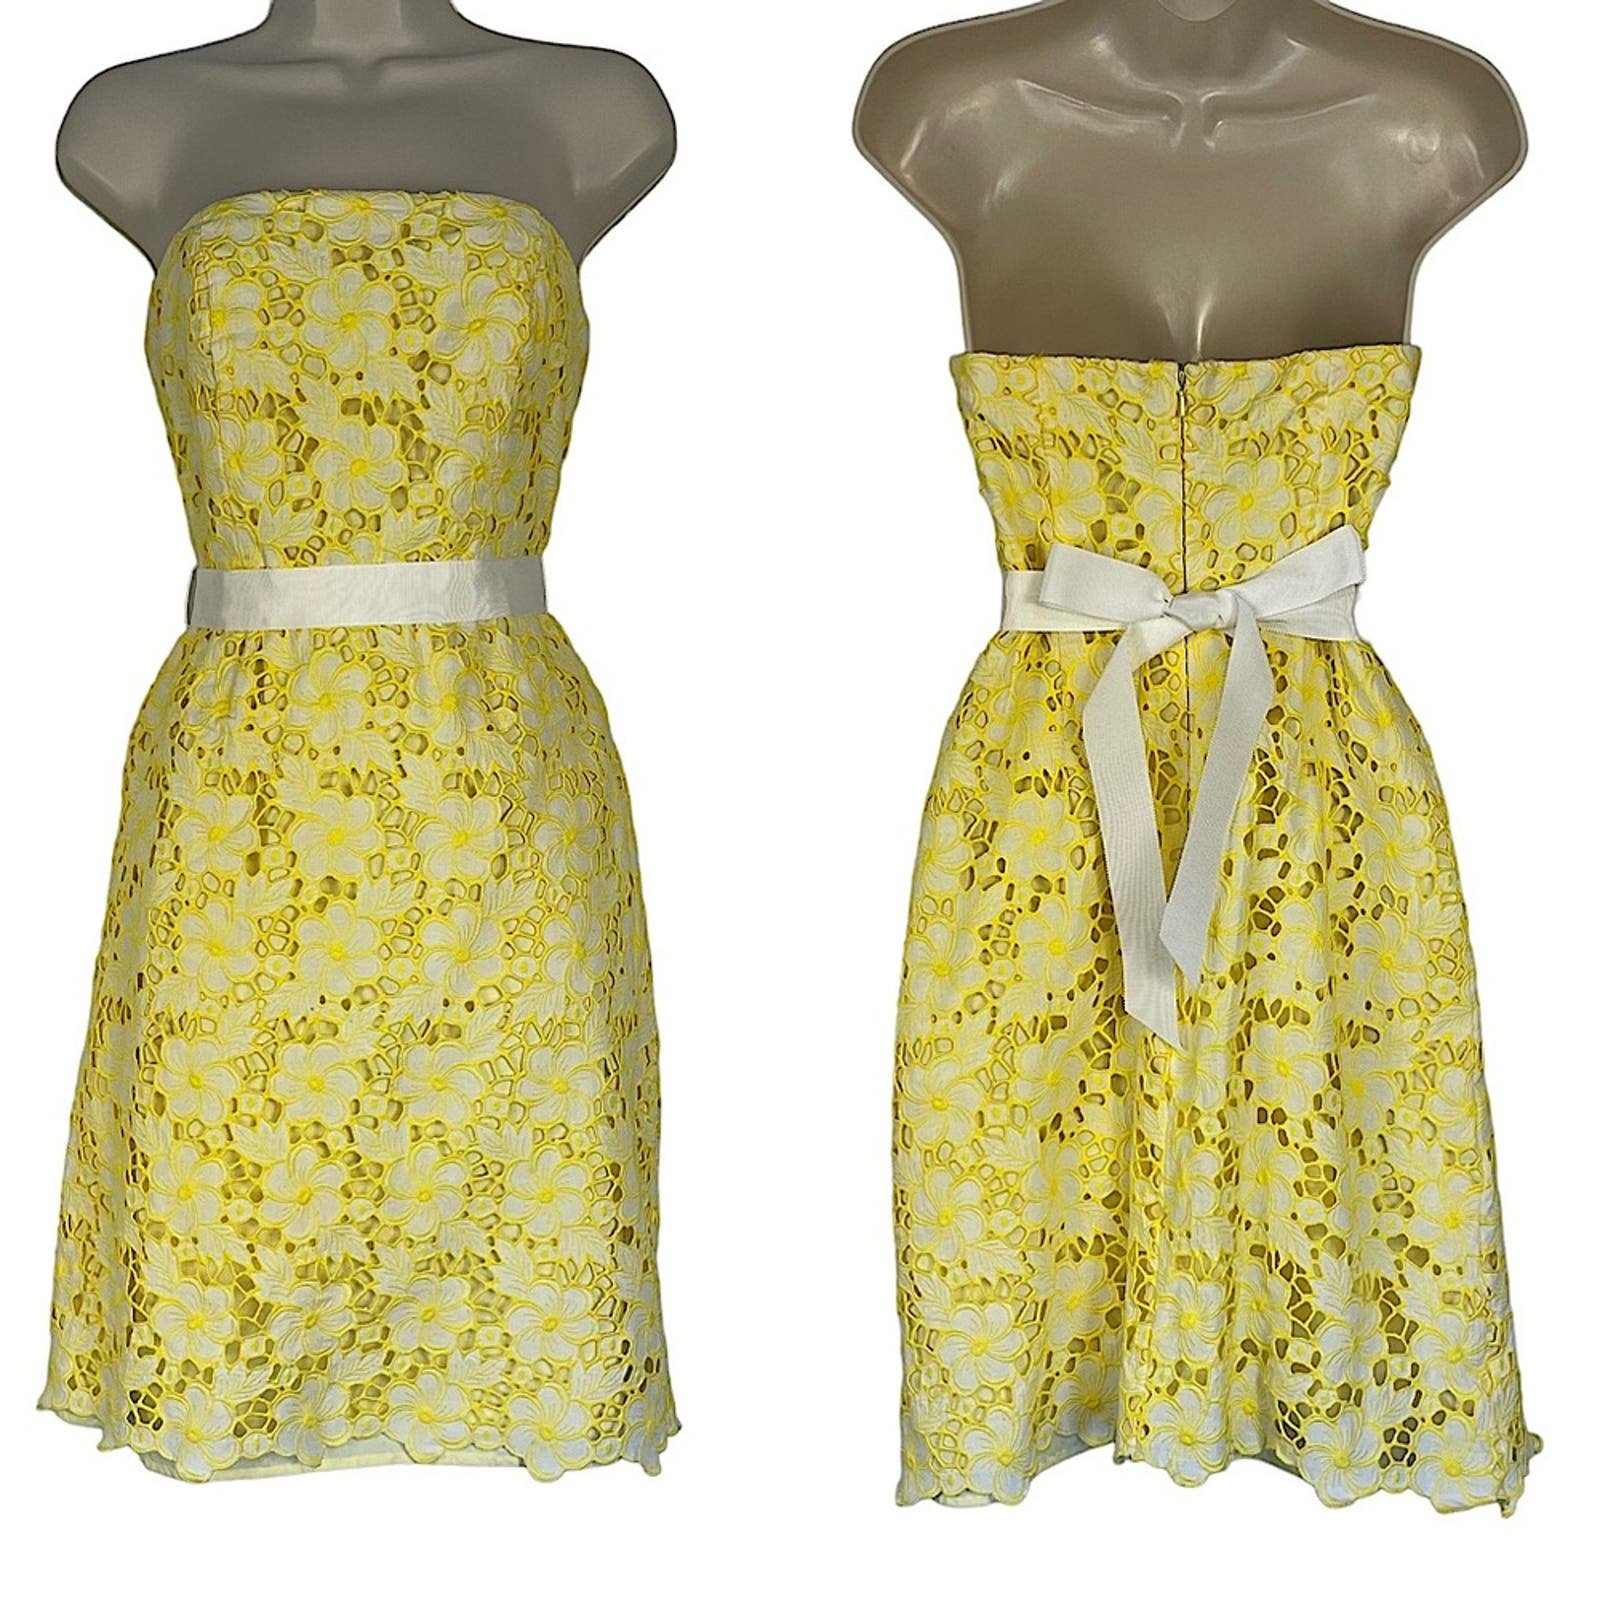 good price Lilly Pulitzer 90´s Strapless Sienna Yellow Floral Kentucky Eyelet Lace Size 2 iducirw0P Wholesale